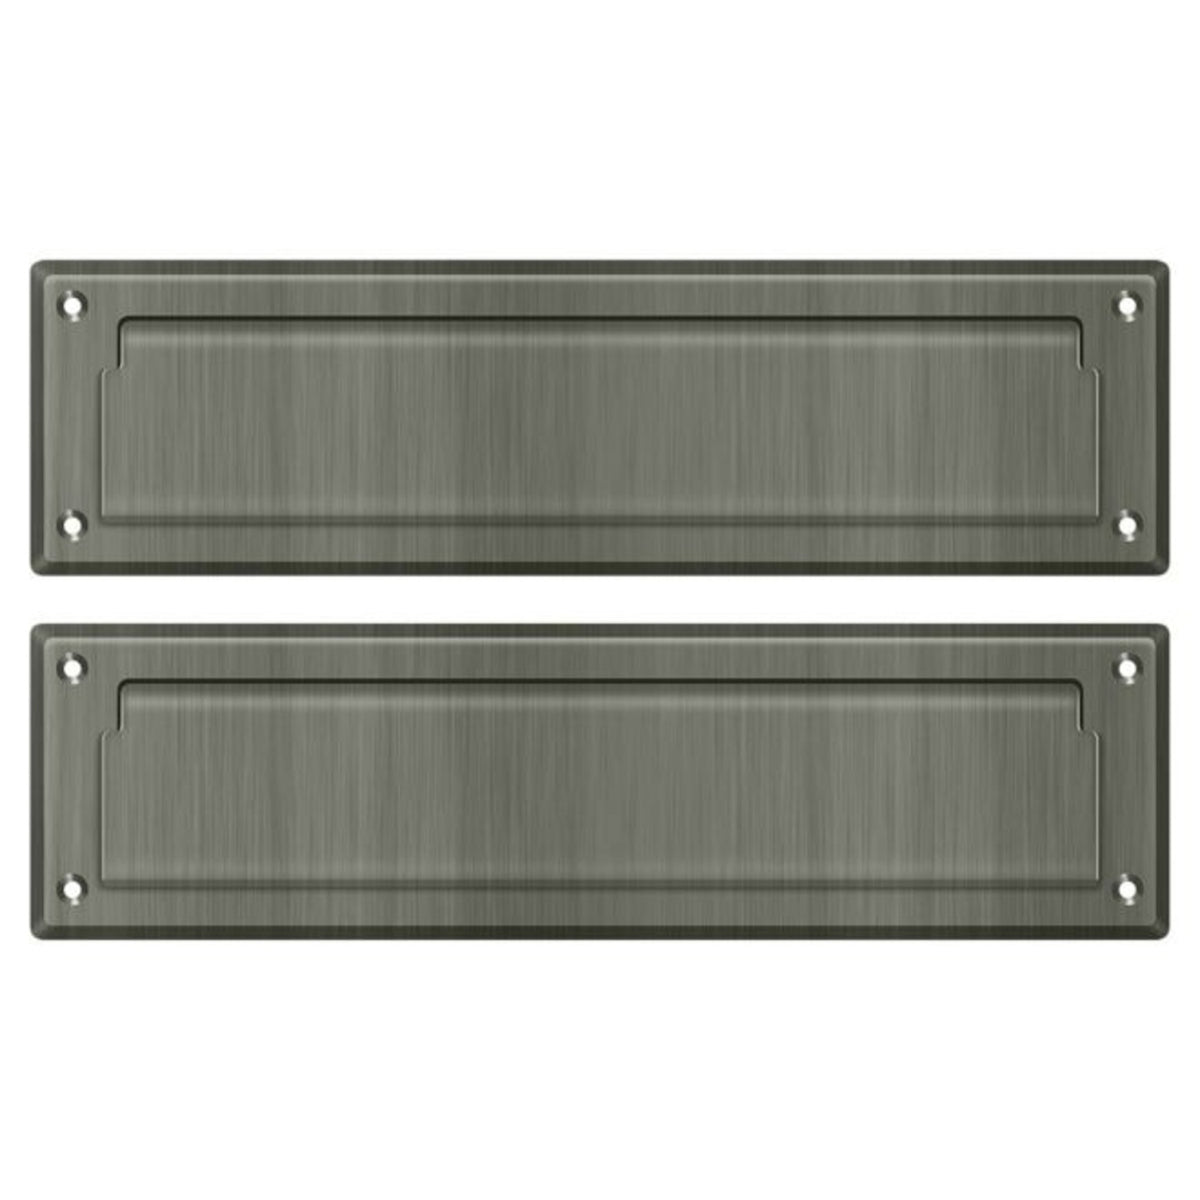 Deltana MS212U15A Mail Slot With Interior Flap, Antique Nickel